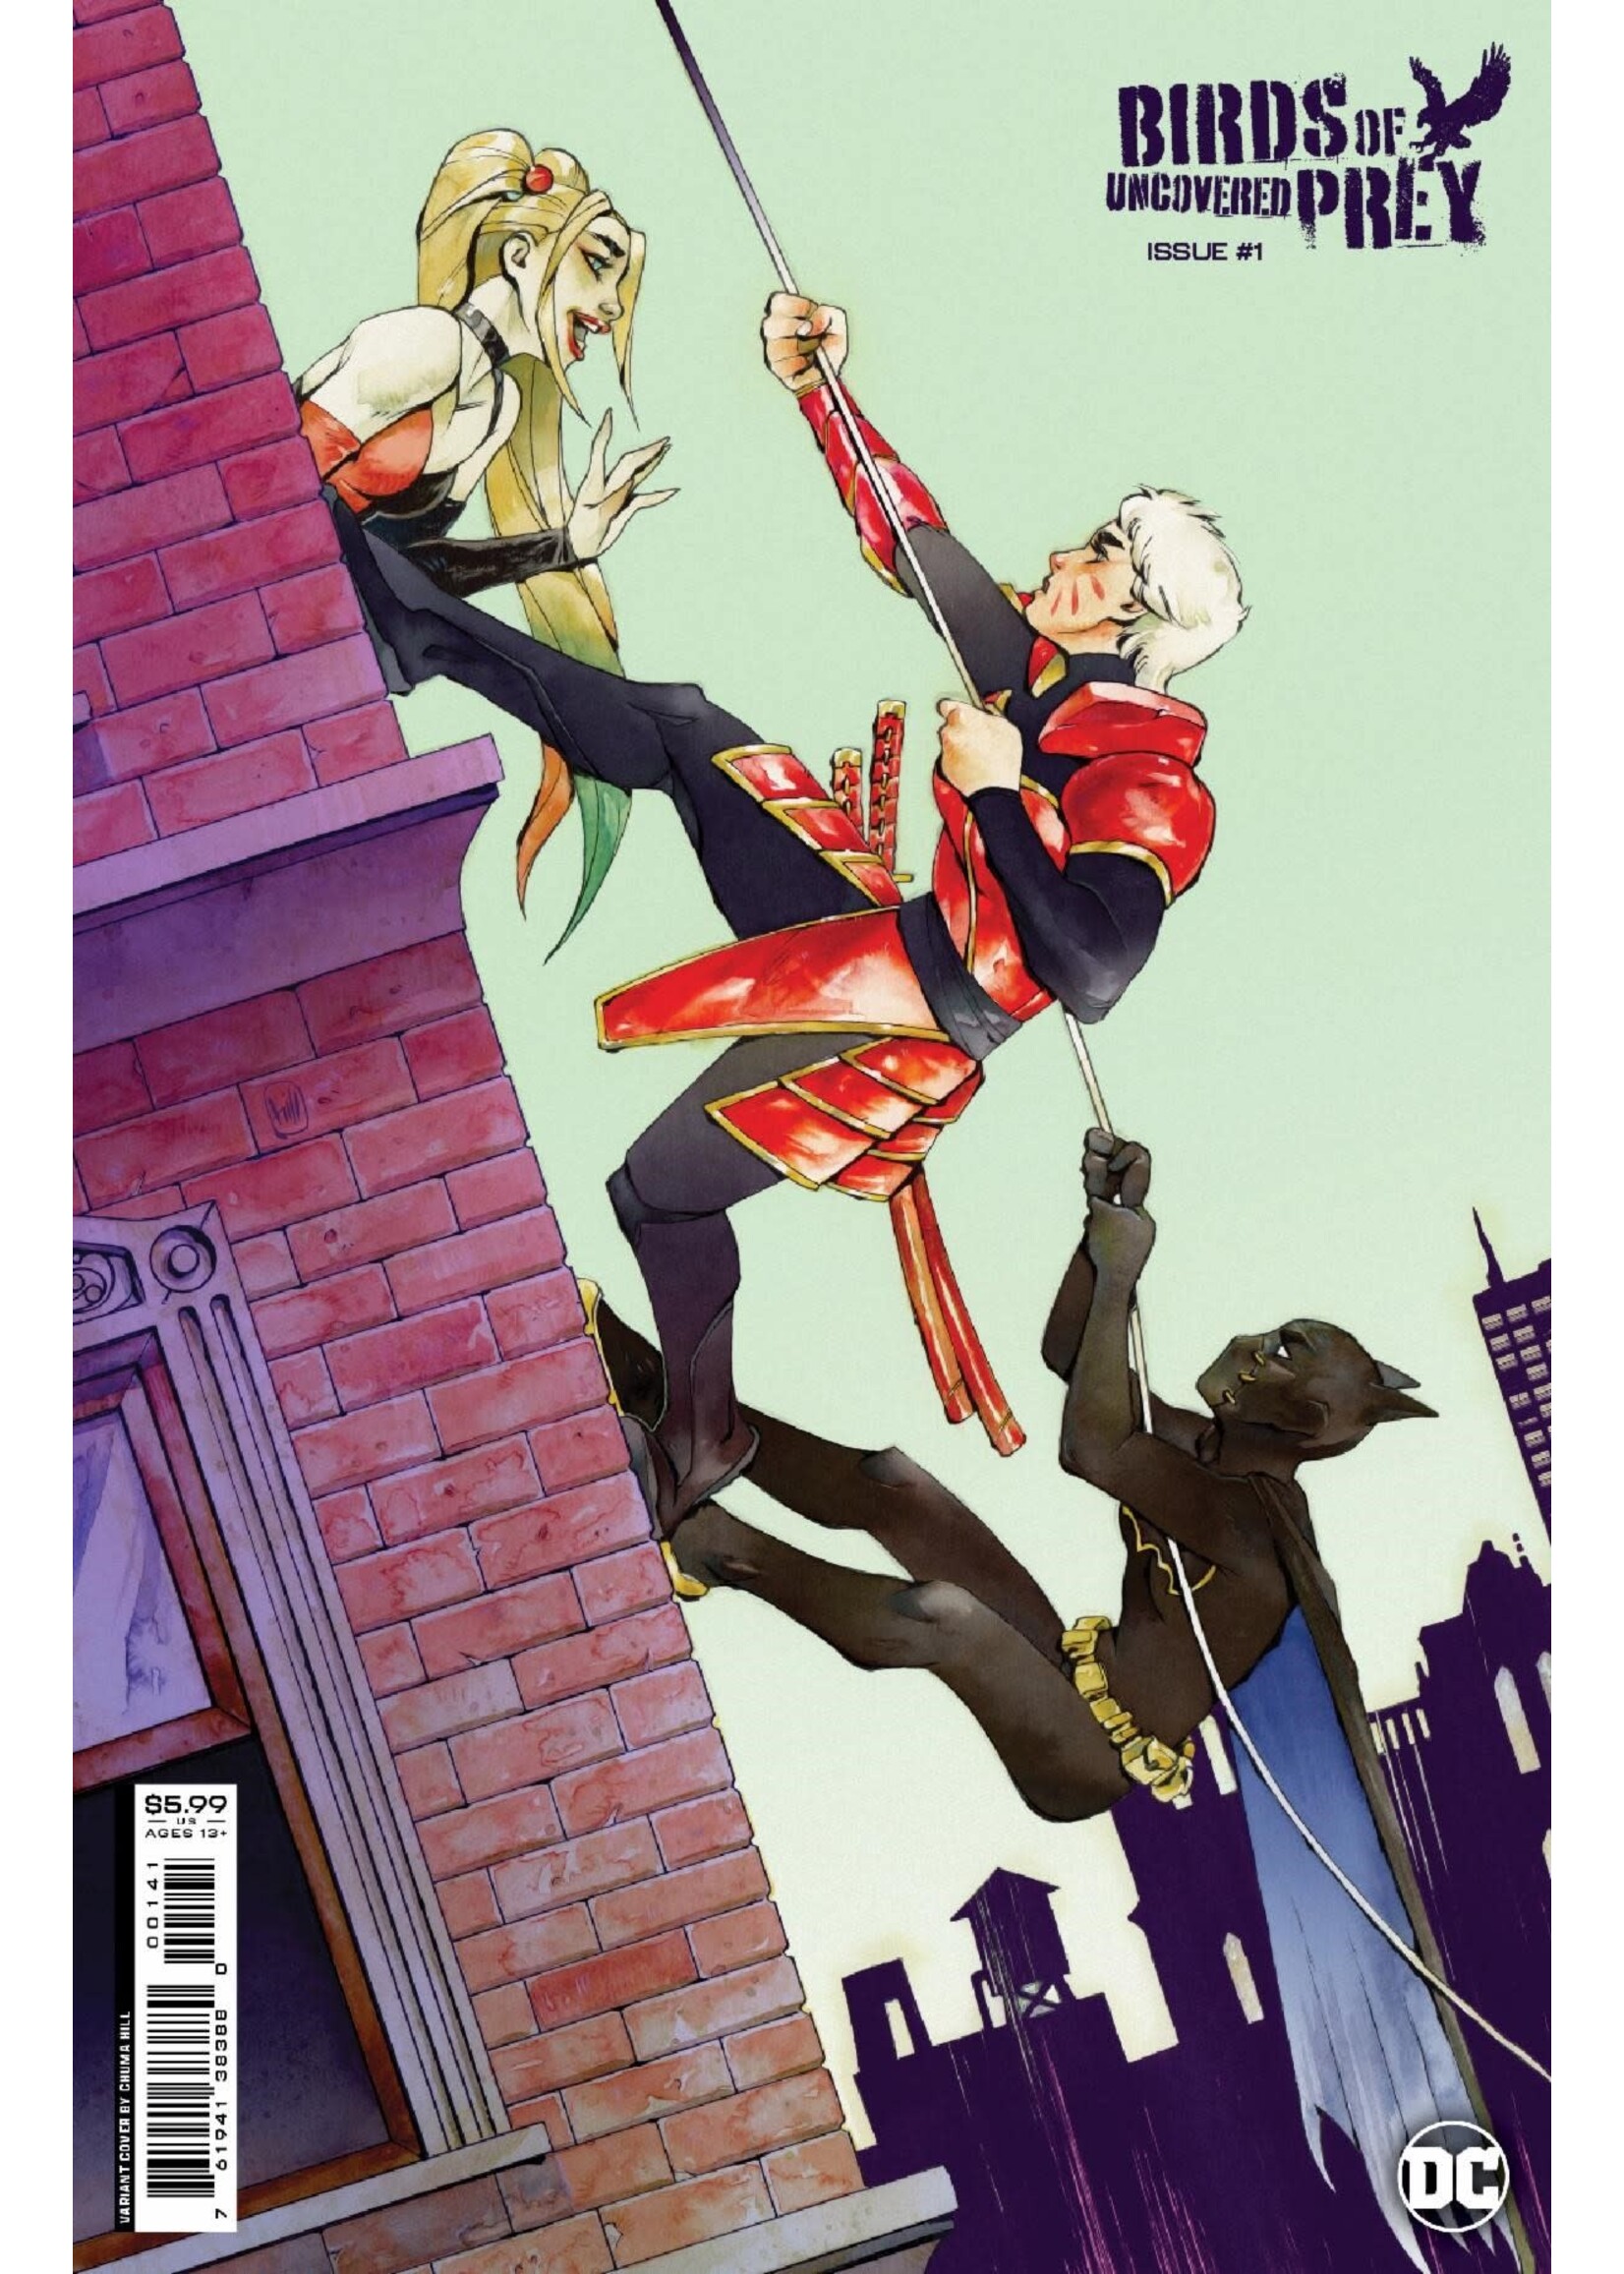 DC COMICS BIRDS OF PREY UNCOVERED #1 HILL